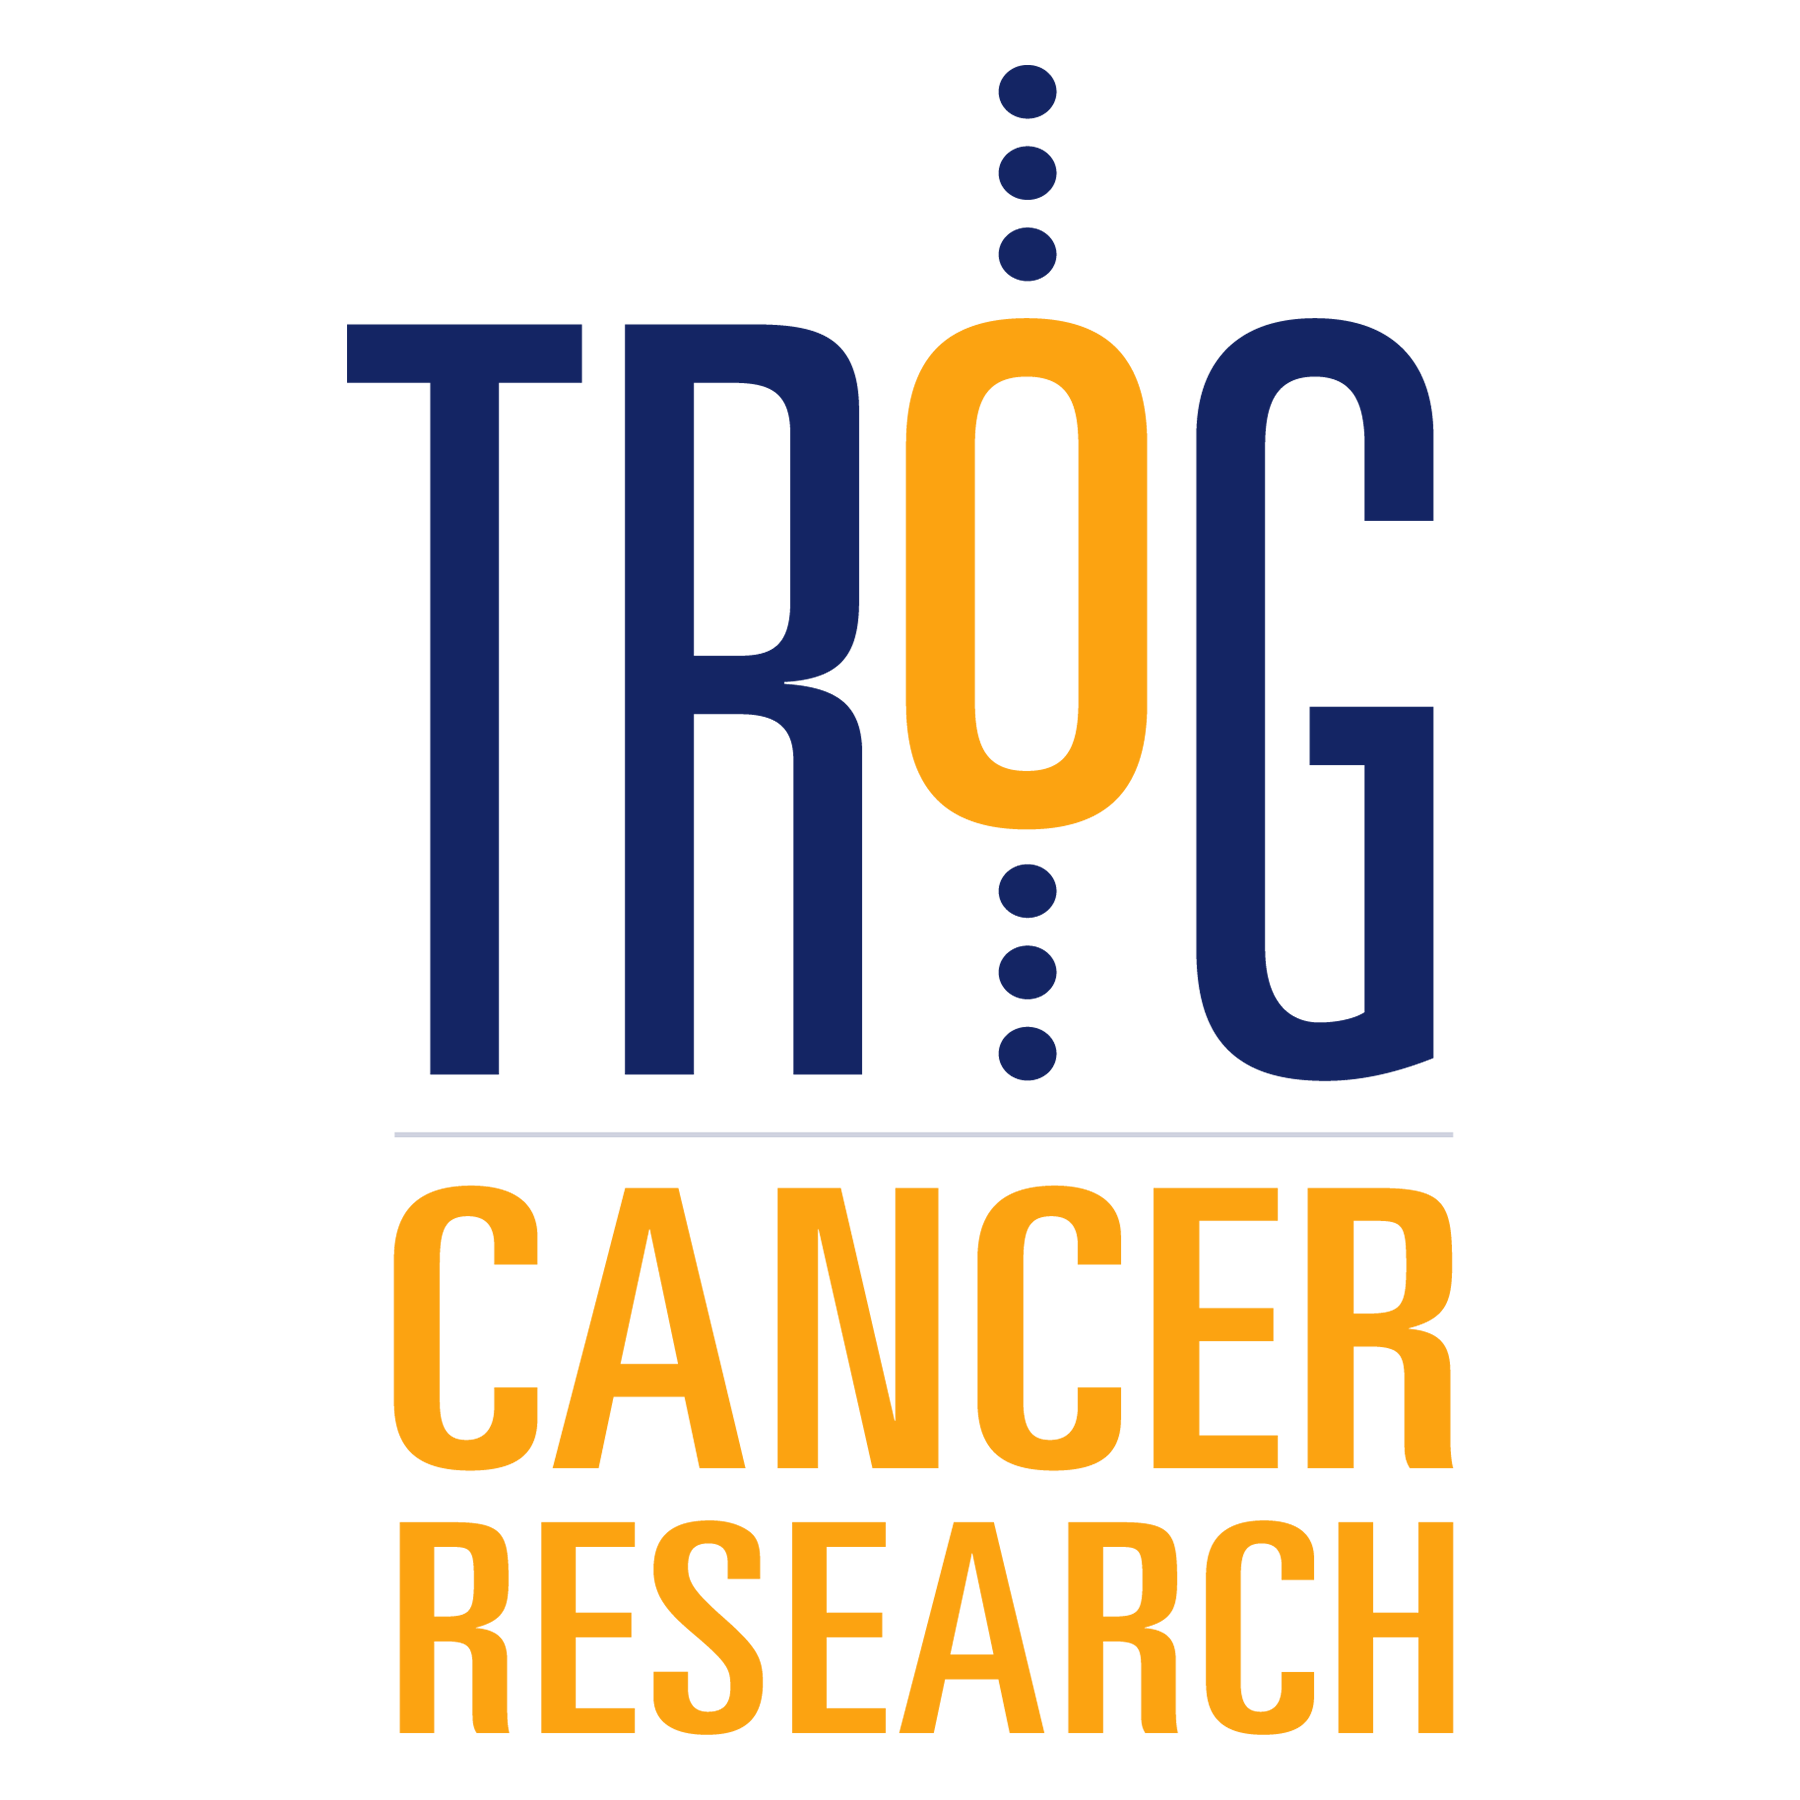 TROG Cancer Research